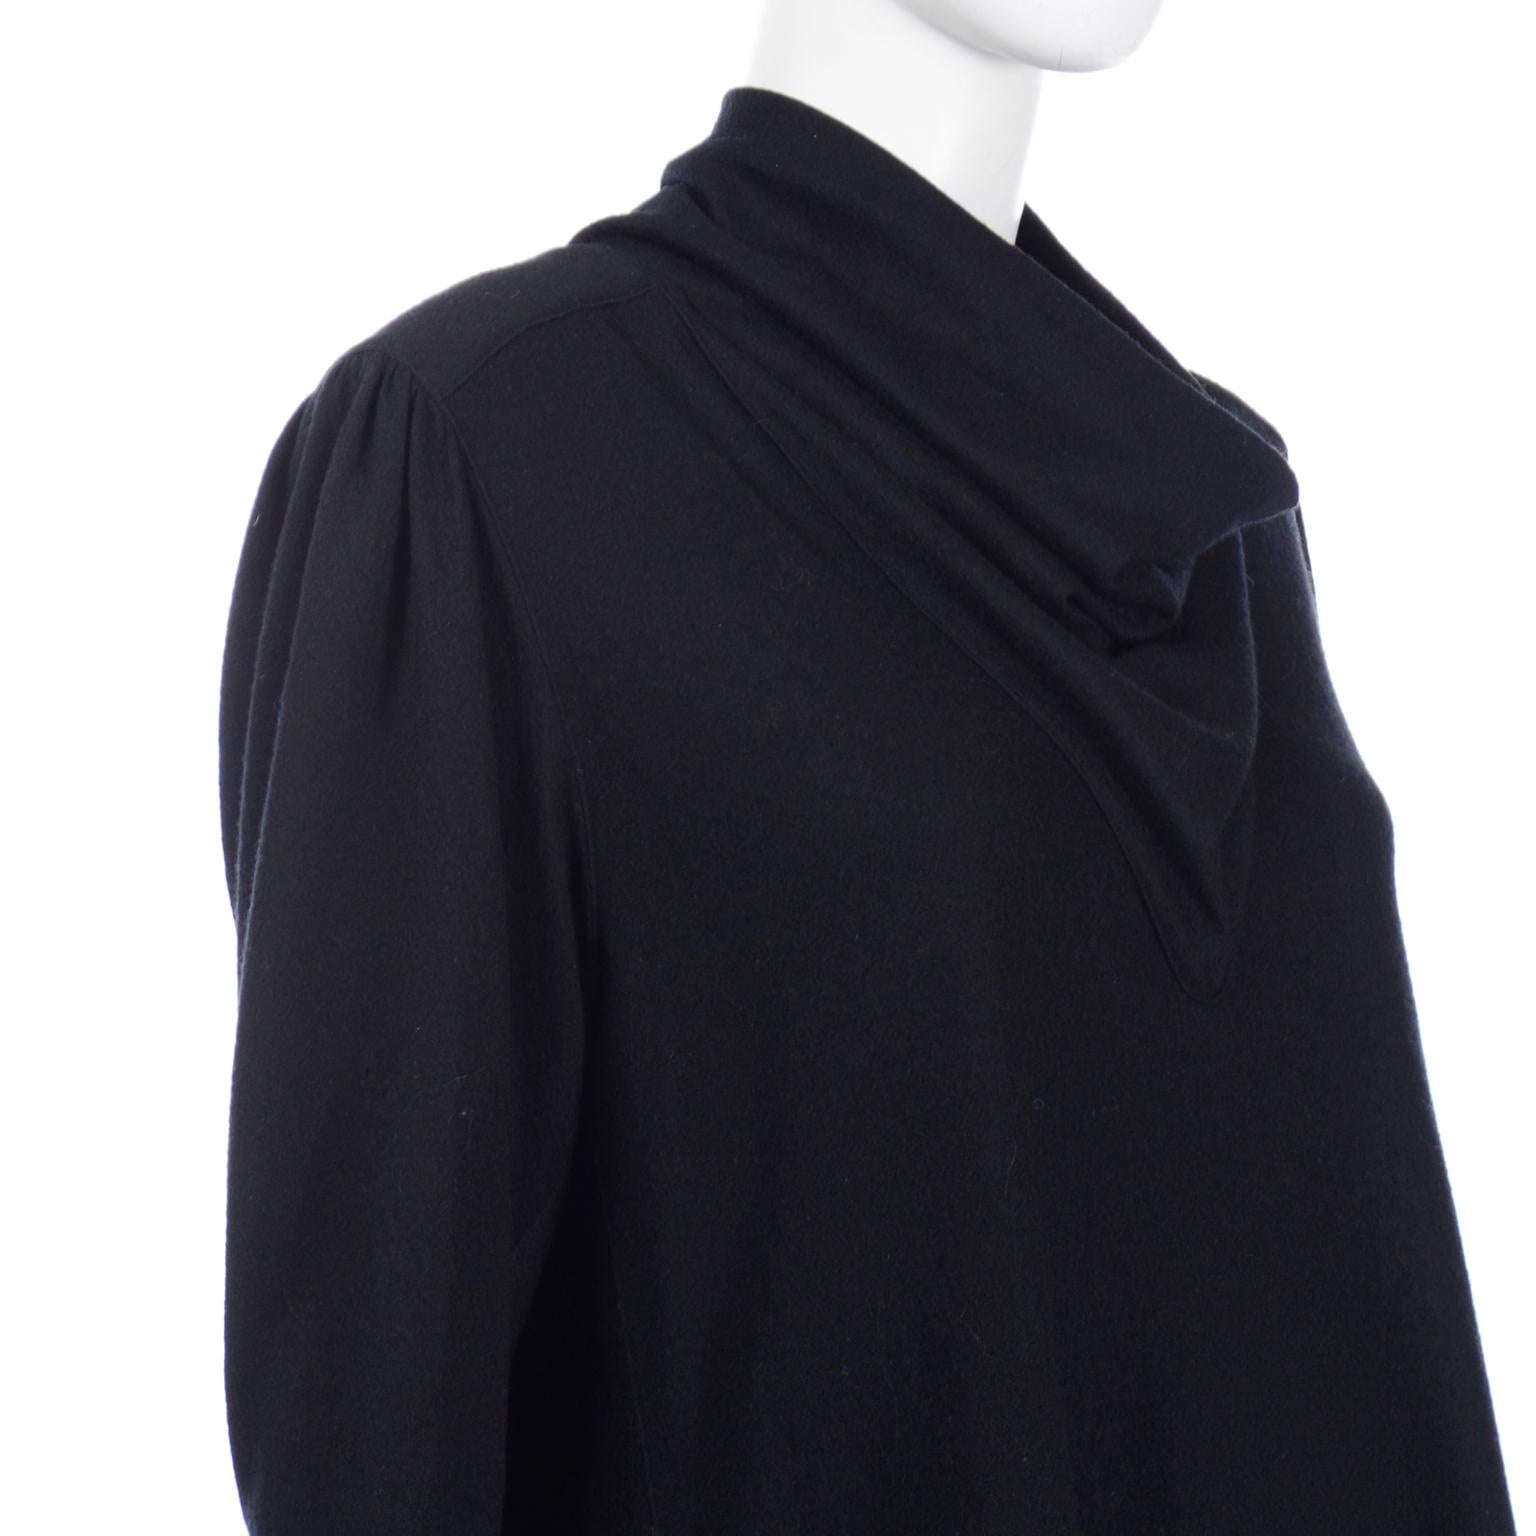 Issey Miyake 1980s vintage Black Wool Blend Knit Tent Style Dress or Tunic 2